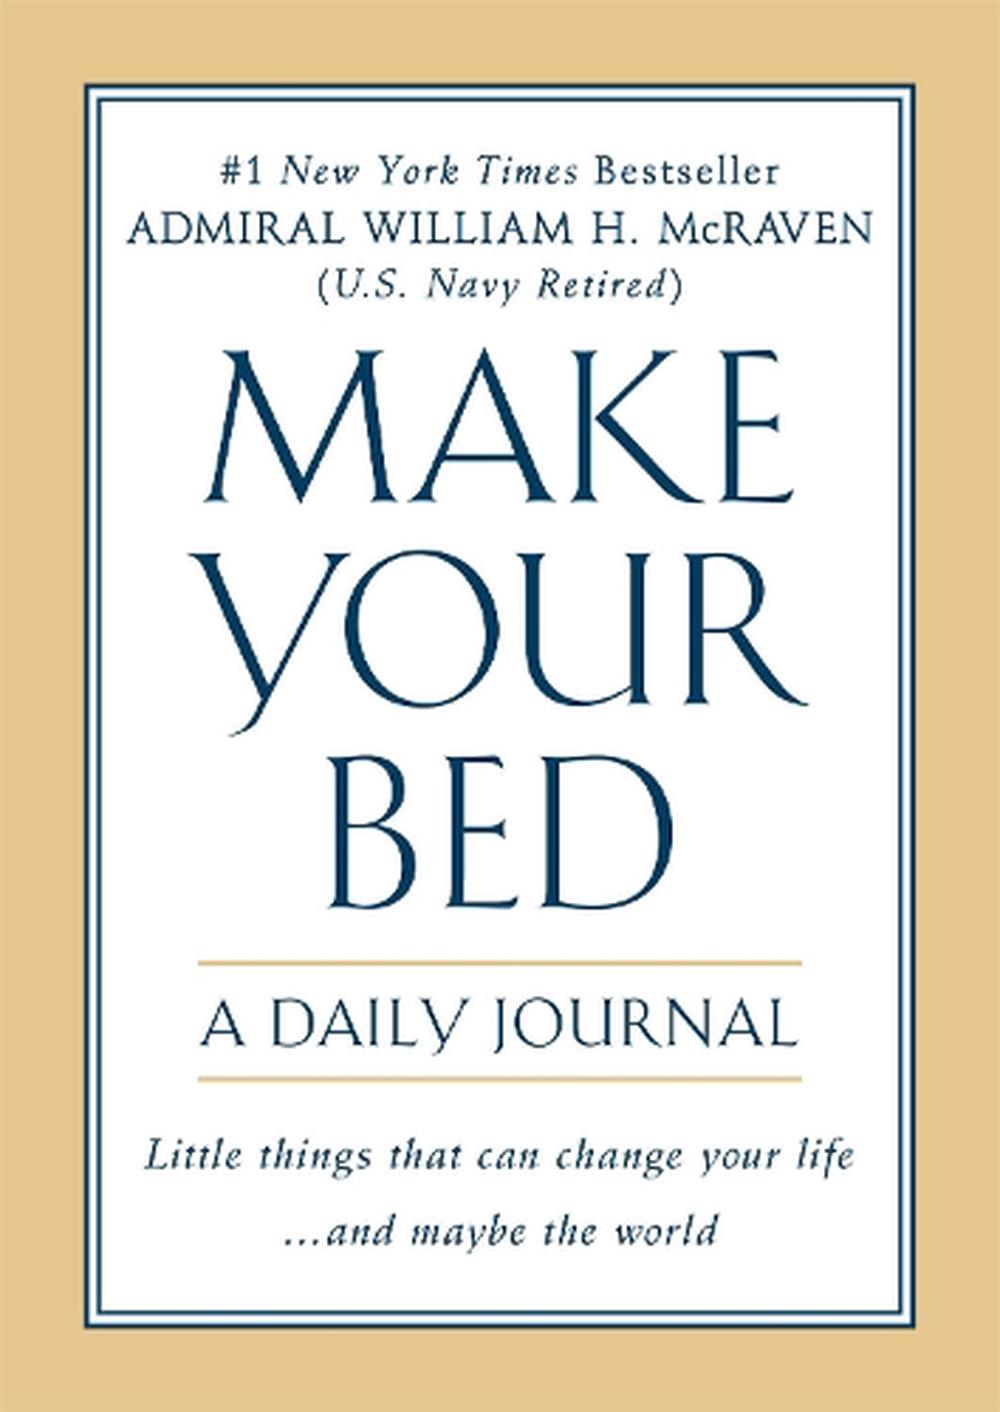 mcraven book make your bed